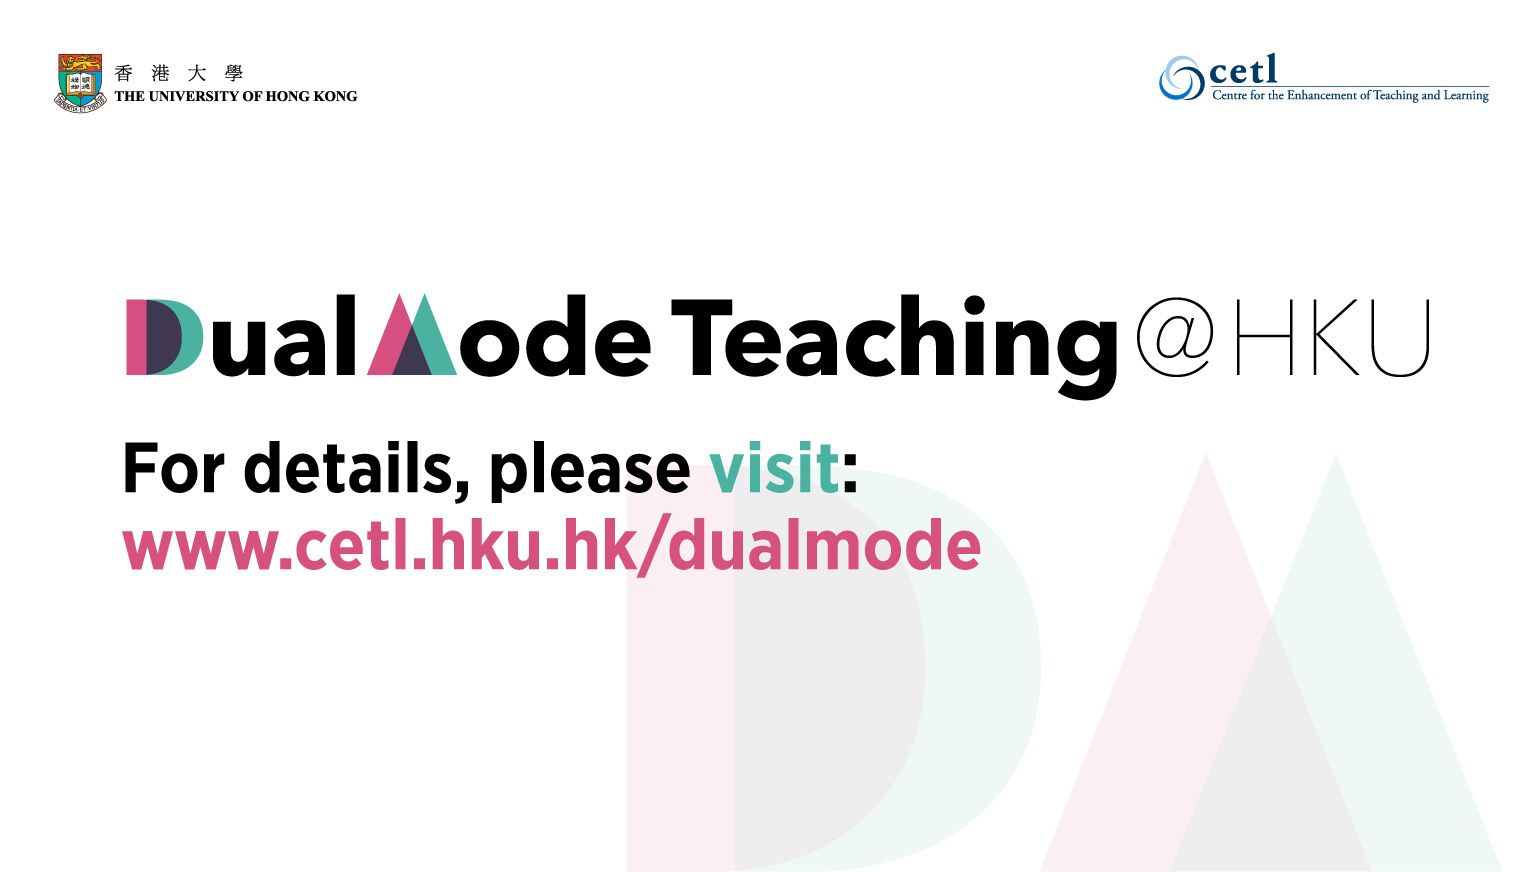 Resources on Dual-Mode Teaching